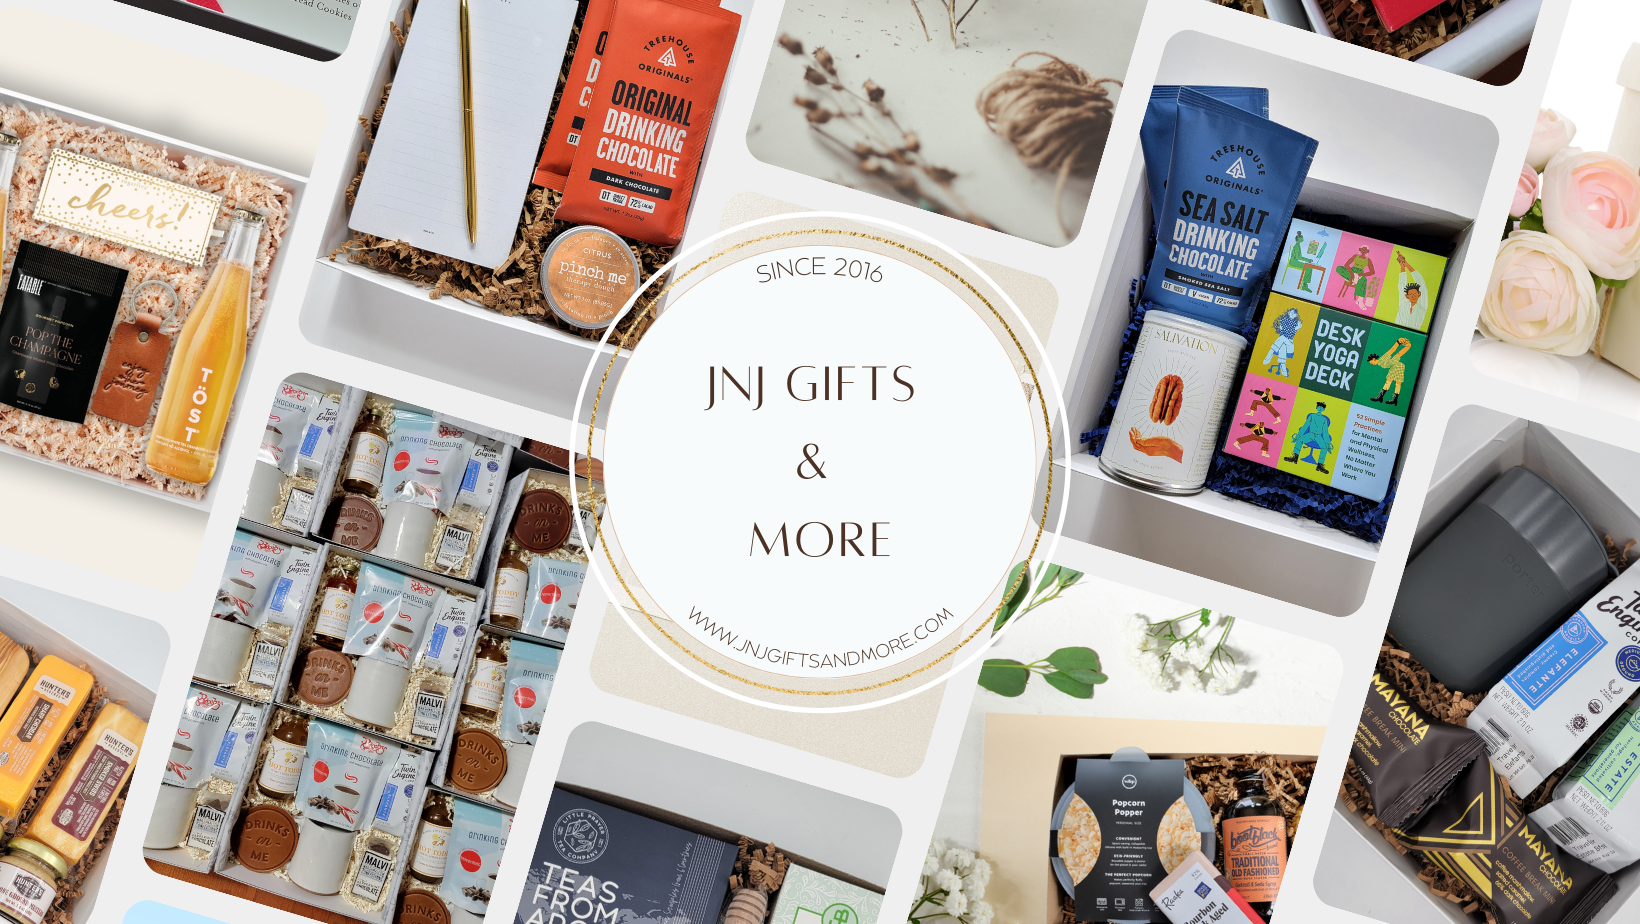 The Wellness Package – JNJ Gifts and More